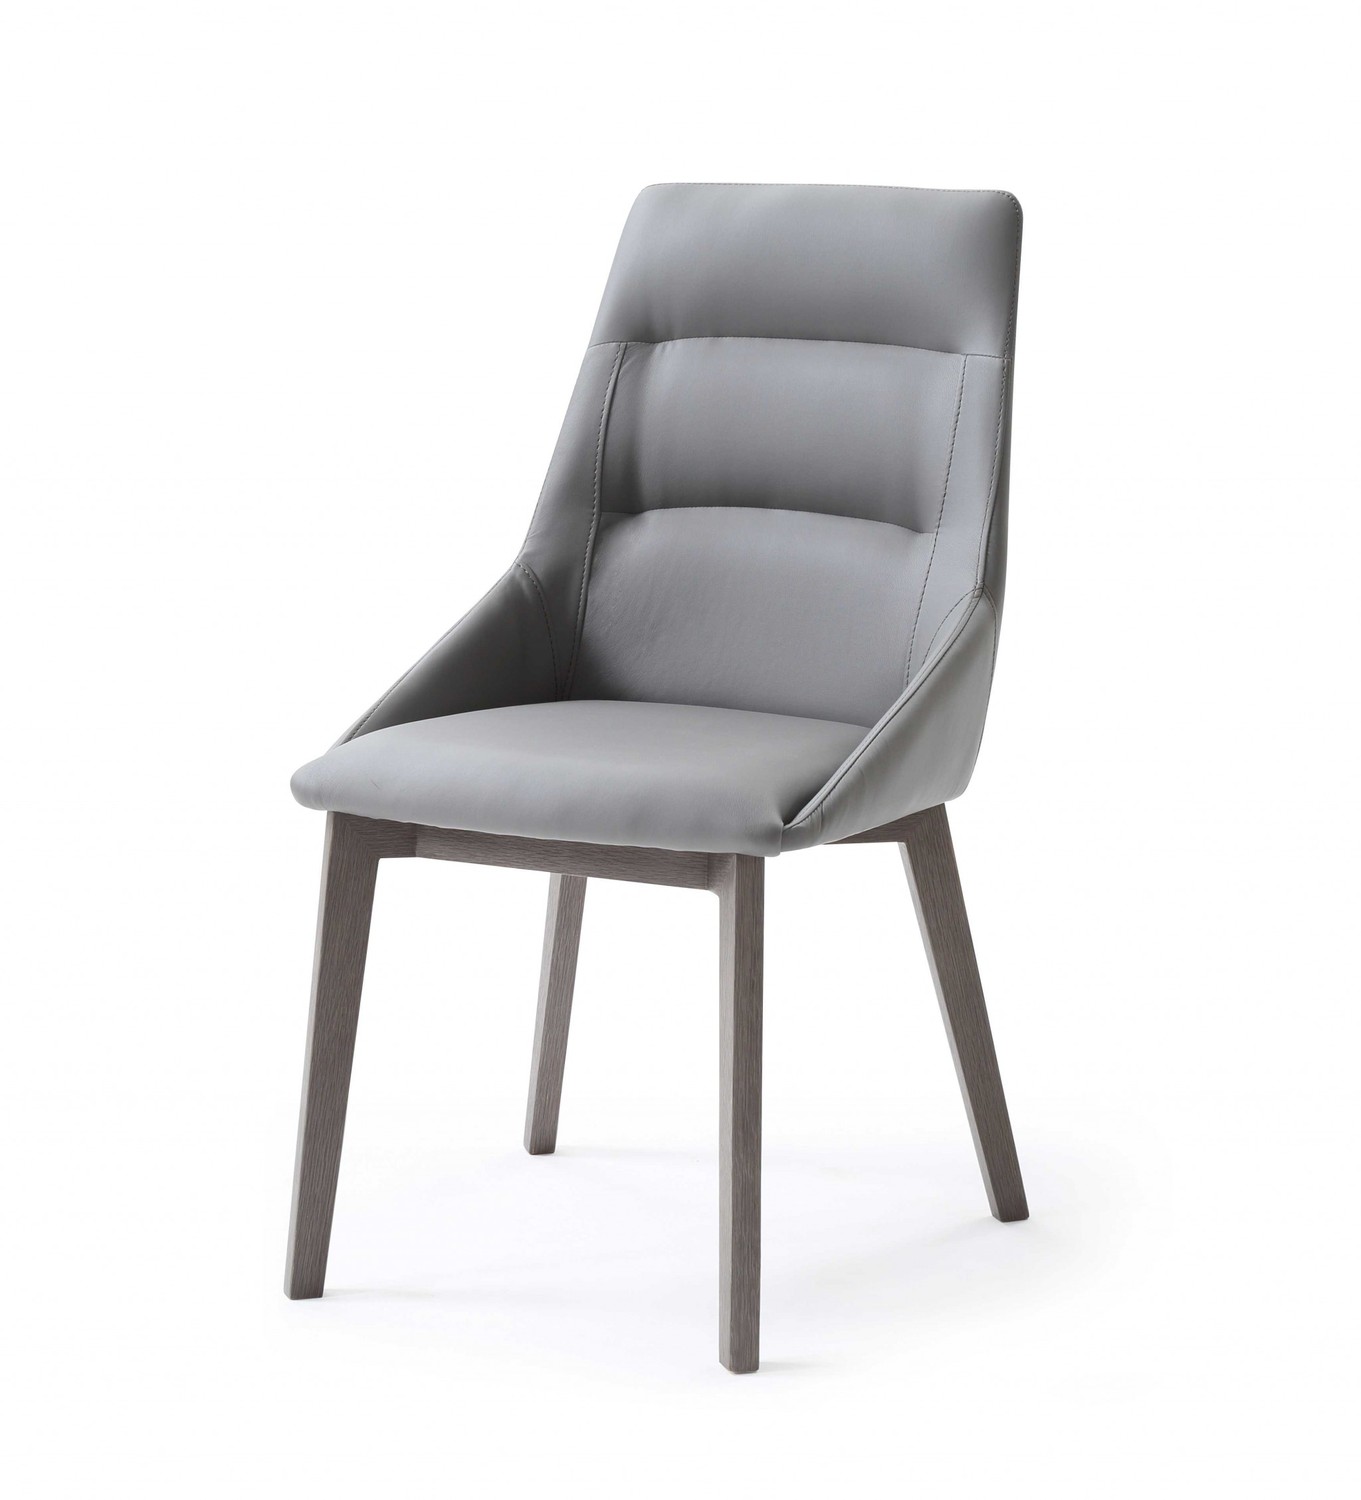 25" X 20" X 35" Grey Faux Leather or Metal Dining Chair